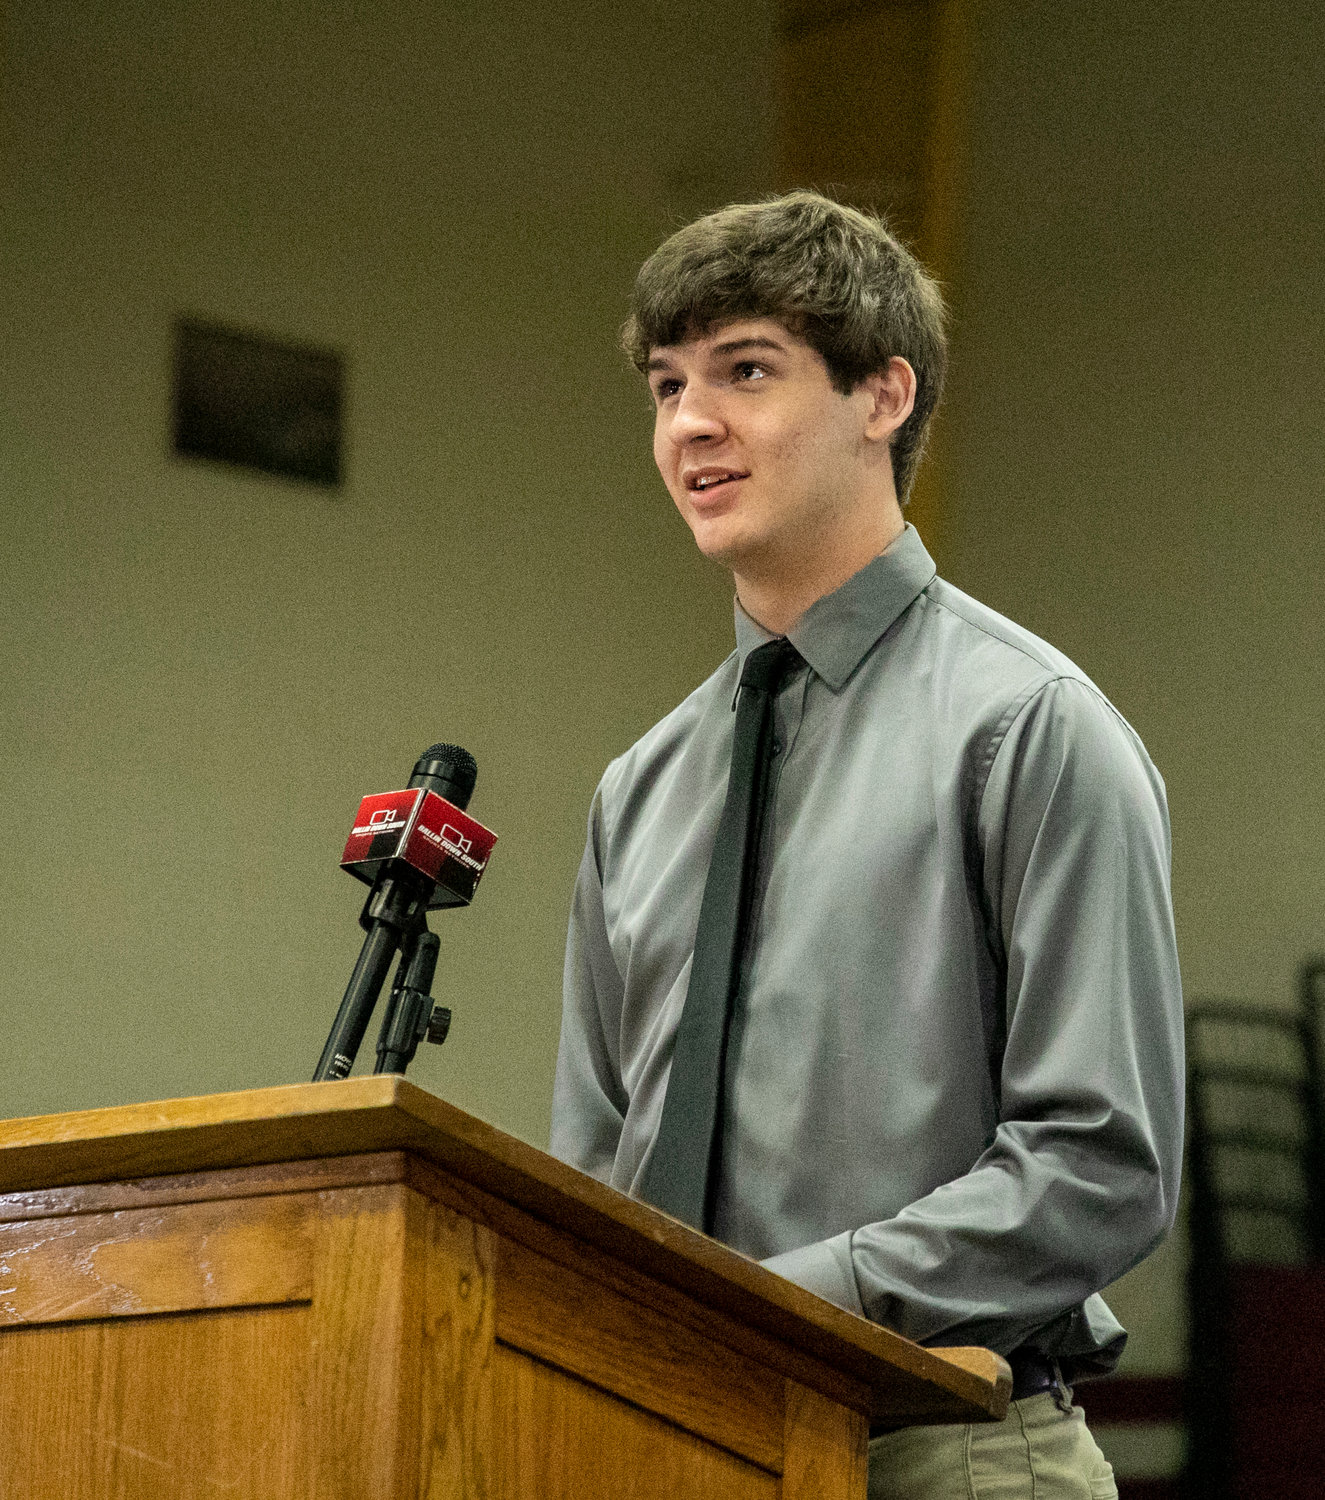 Elberta's Blake Hodges was among the student-athletes who spoke with reporters at the Baldwin County basketball media day event hosted by the Ballin Down South Sports Network at Robertsdale High School Sunday afternoon, Oct. 16.